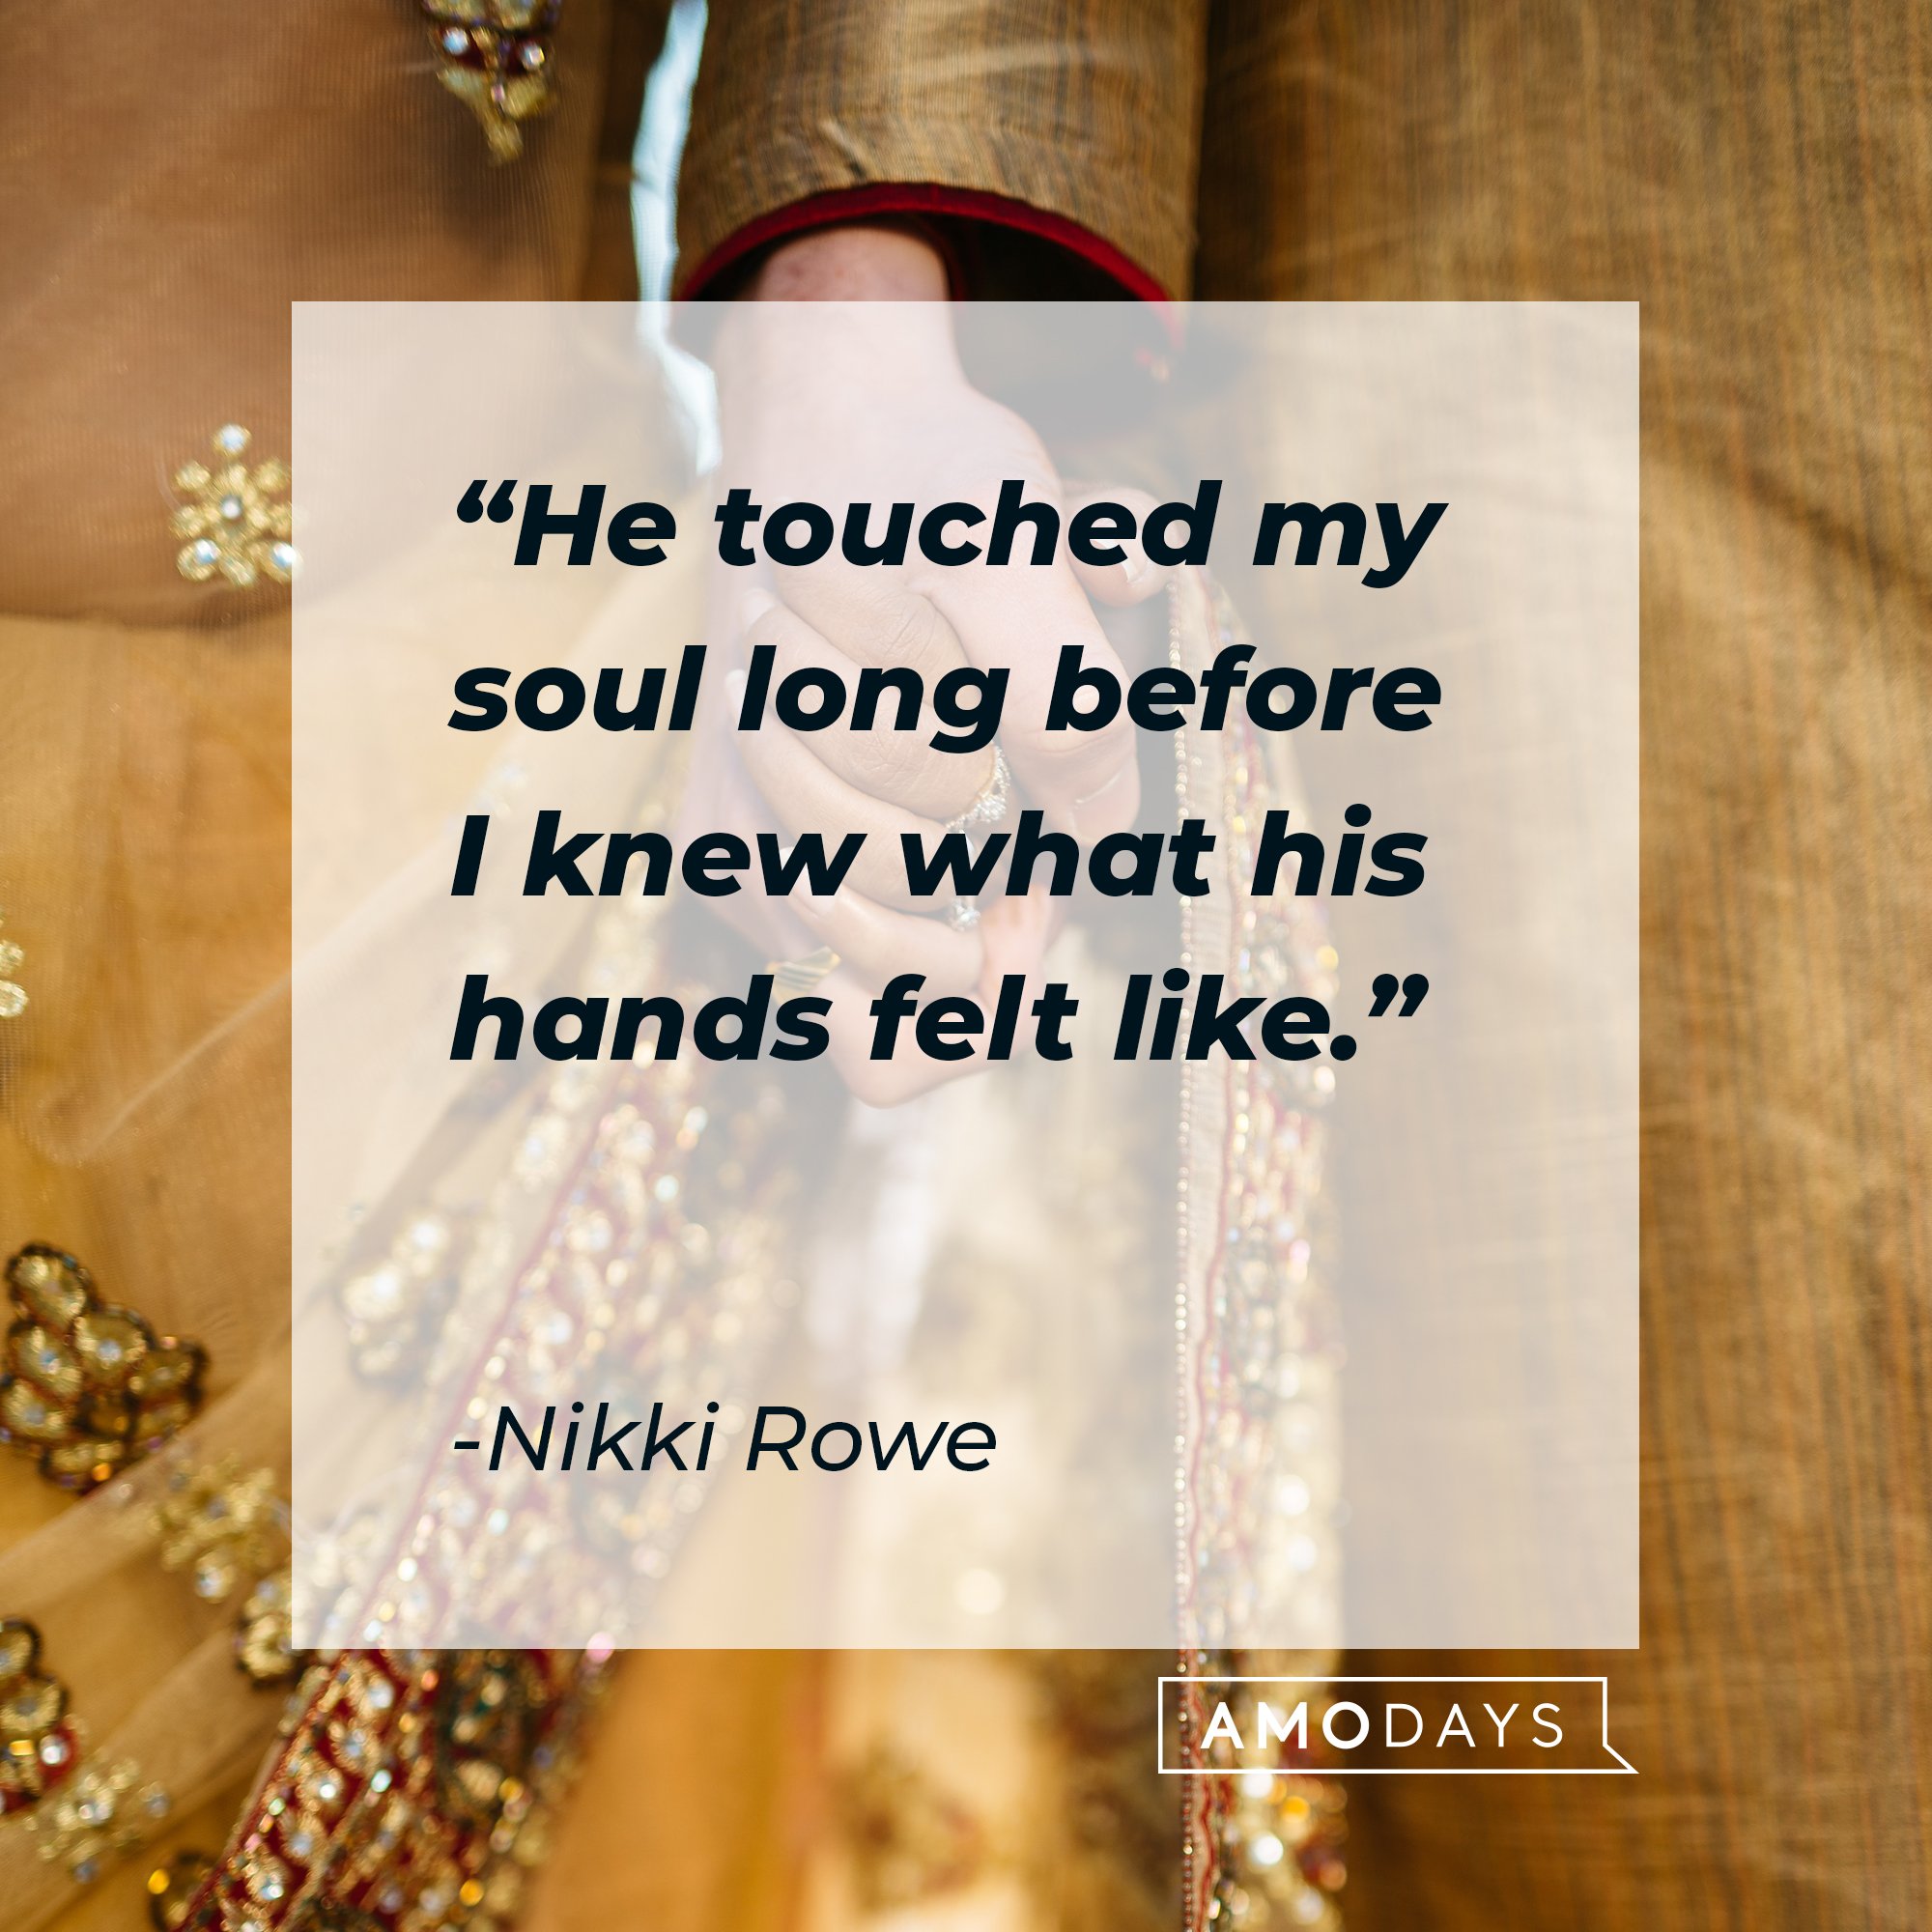 Nikki Rowe’s quote: "He touched my soul long before I knew what his hands felt like." | Image: AmoDays